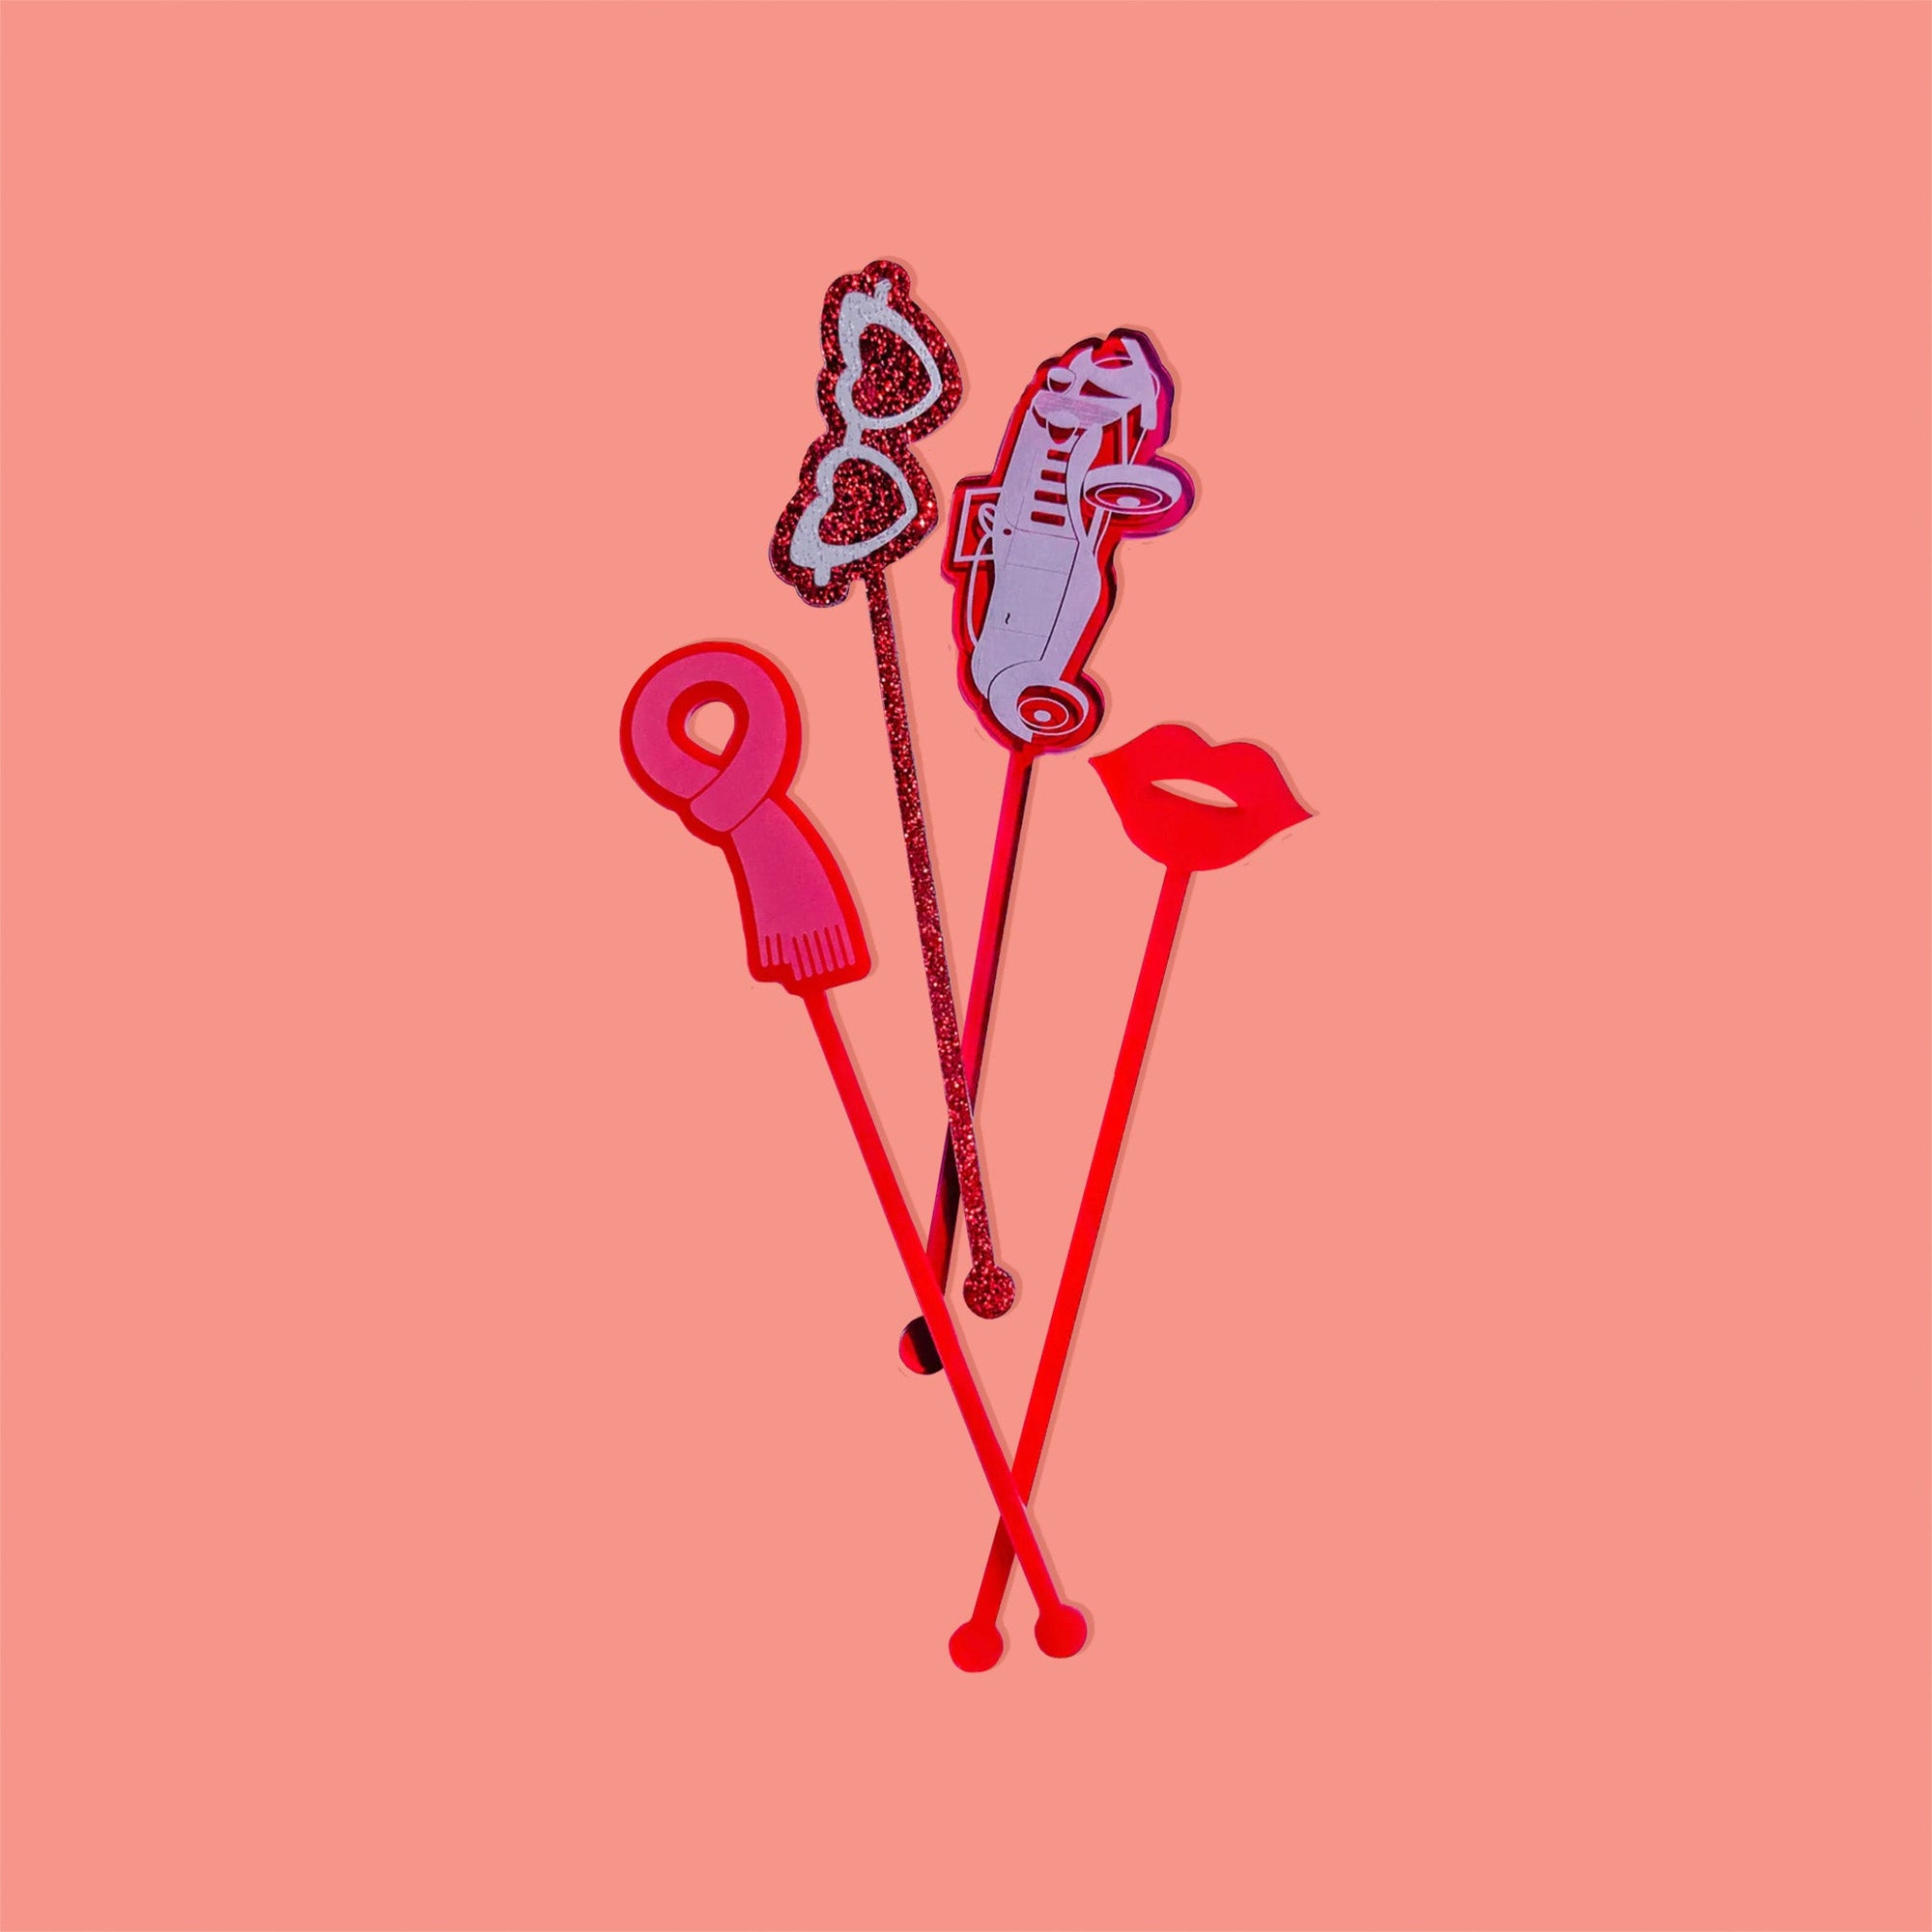 On a coral pink background sits acrylic stirrers. This Taylor Swift inspired set of 4 stirrers includes a red opaque scarf, red glitter heart sunglasses, a red transparent vintage car, and red translucent lips.